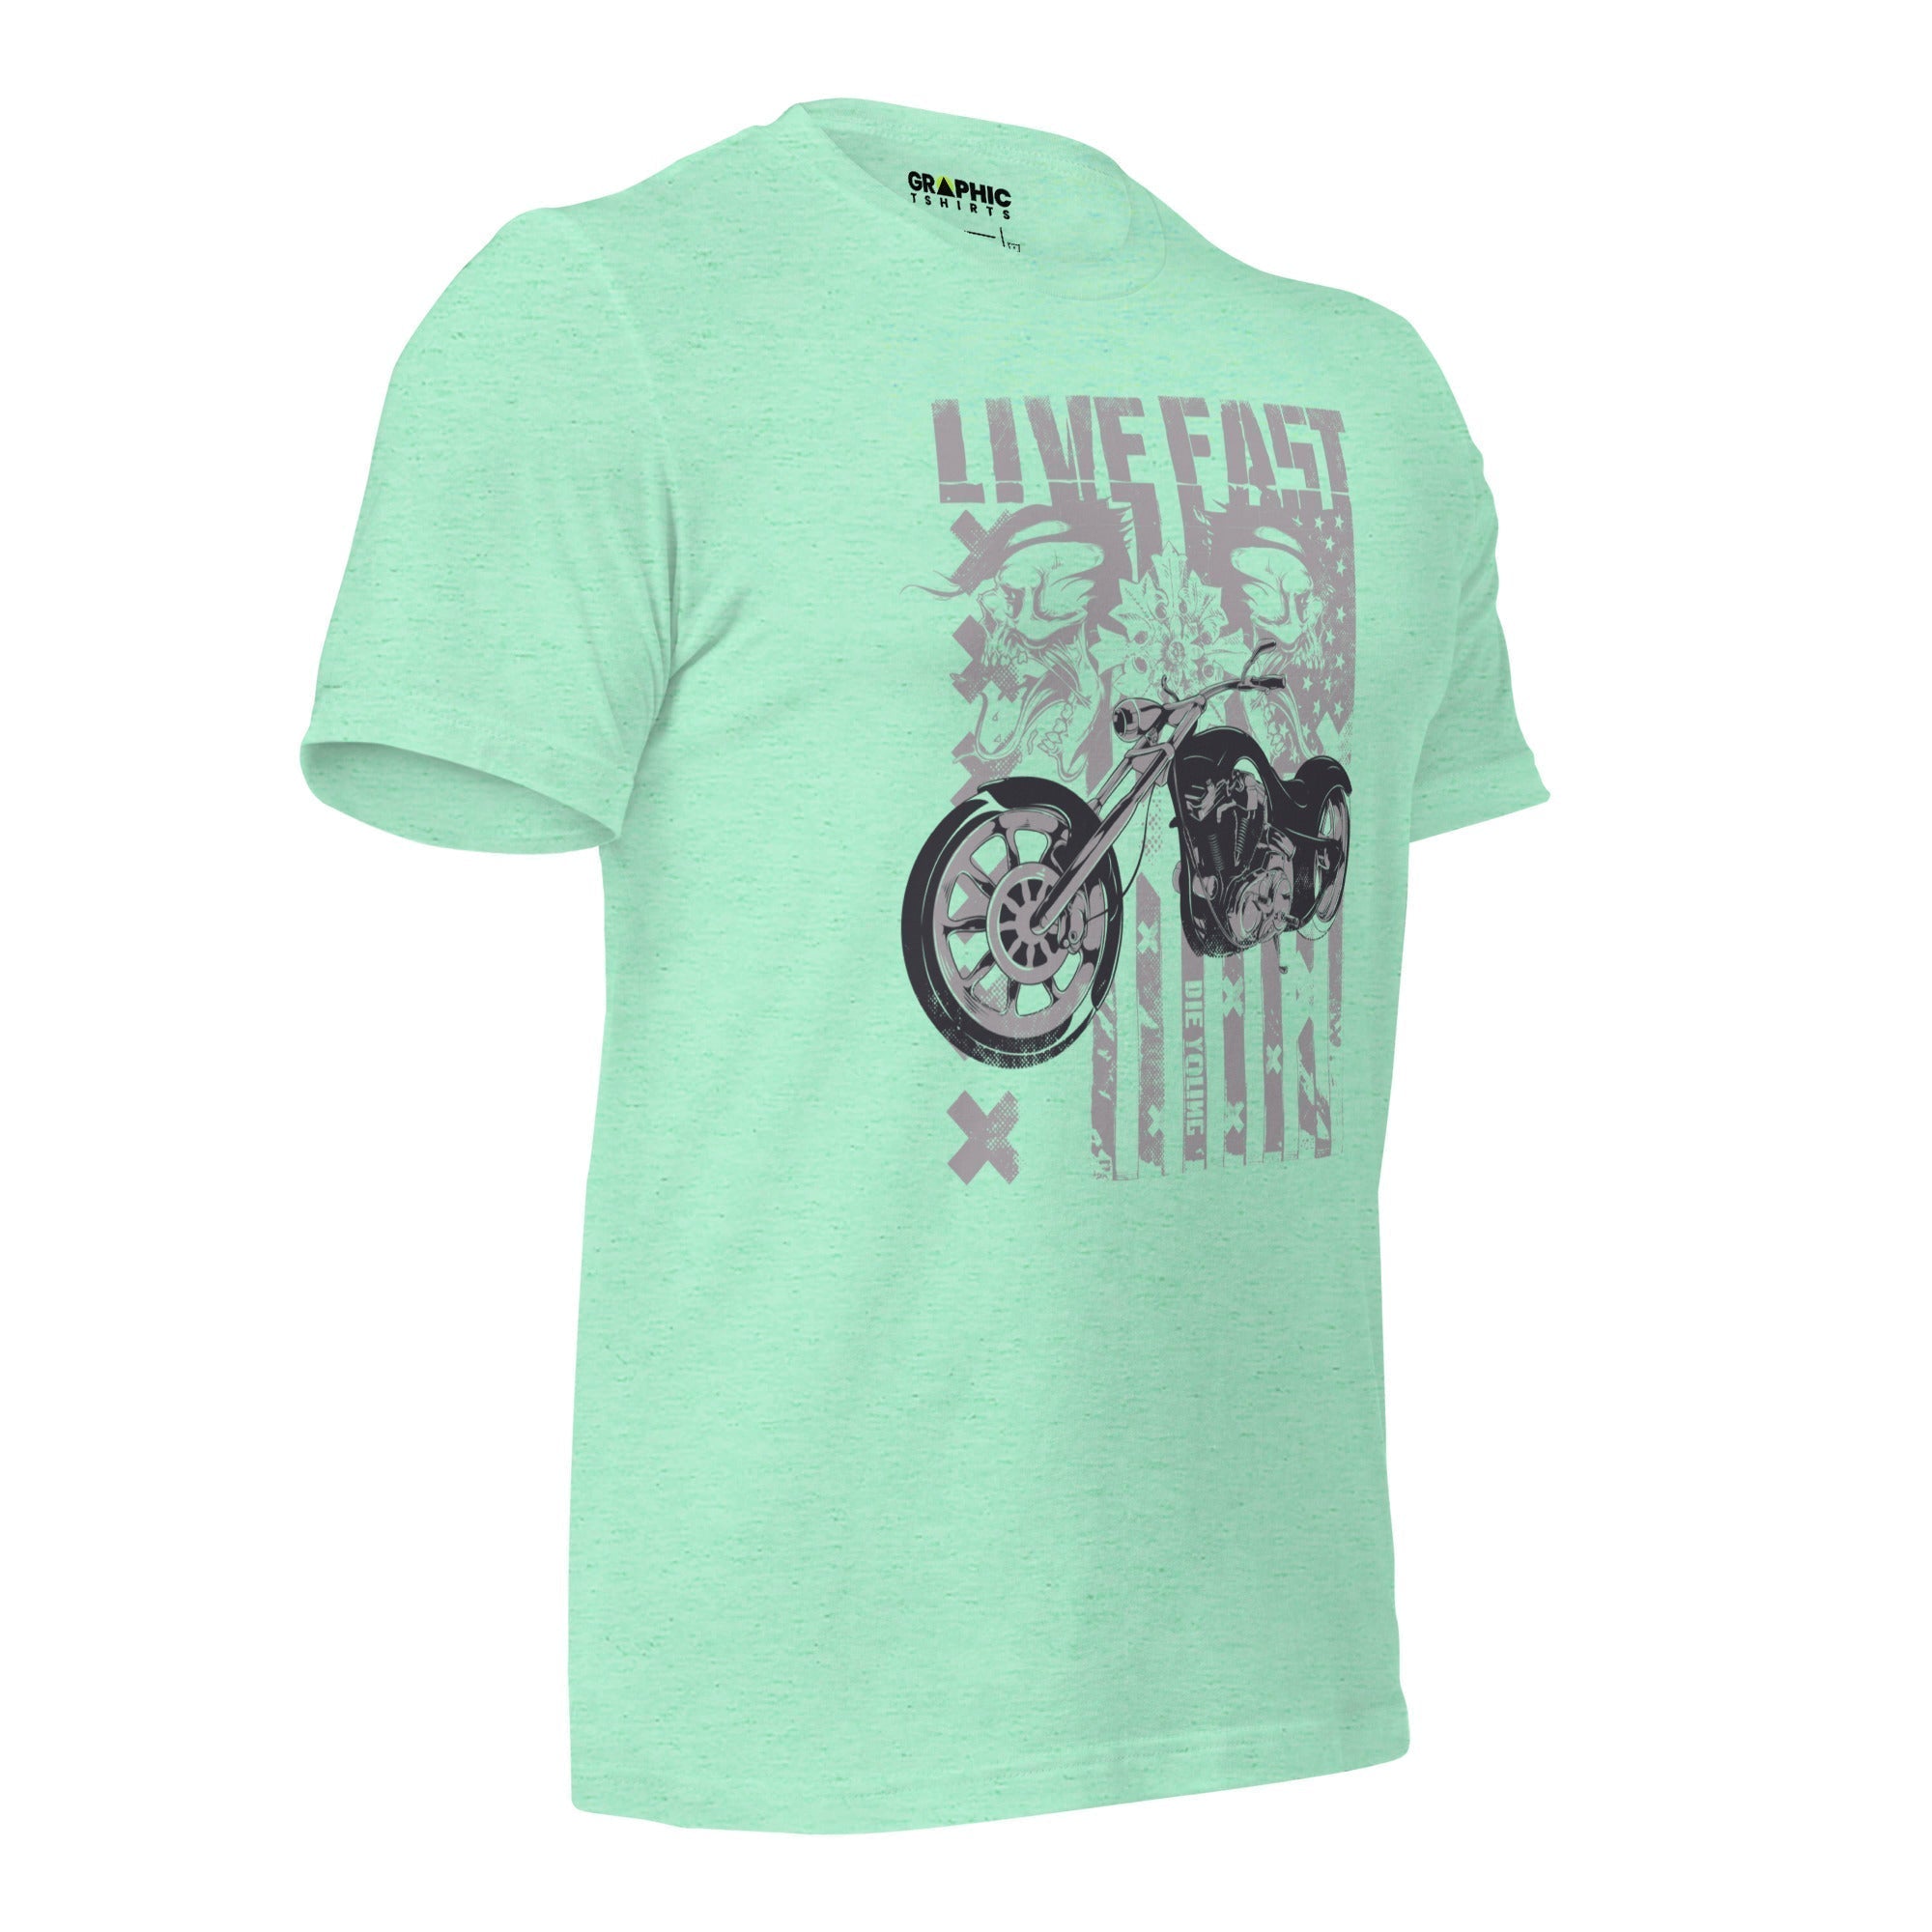 Unisex Staple T-Shirt - Live Fast Motorcycle - GRAPHIC T-SHIRTS